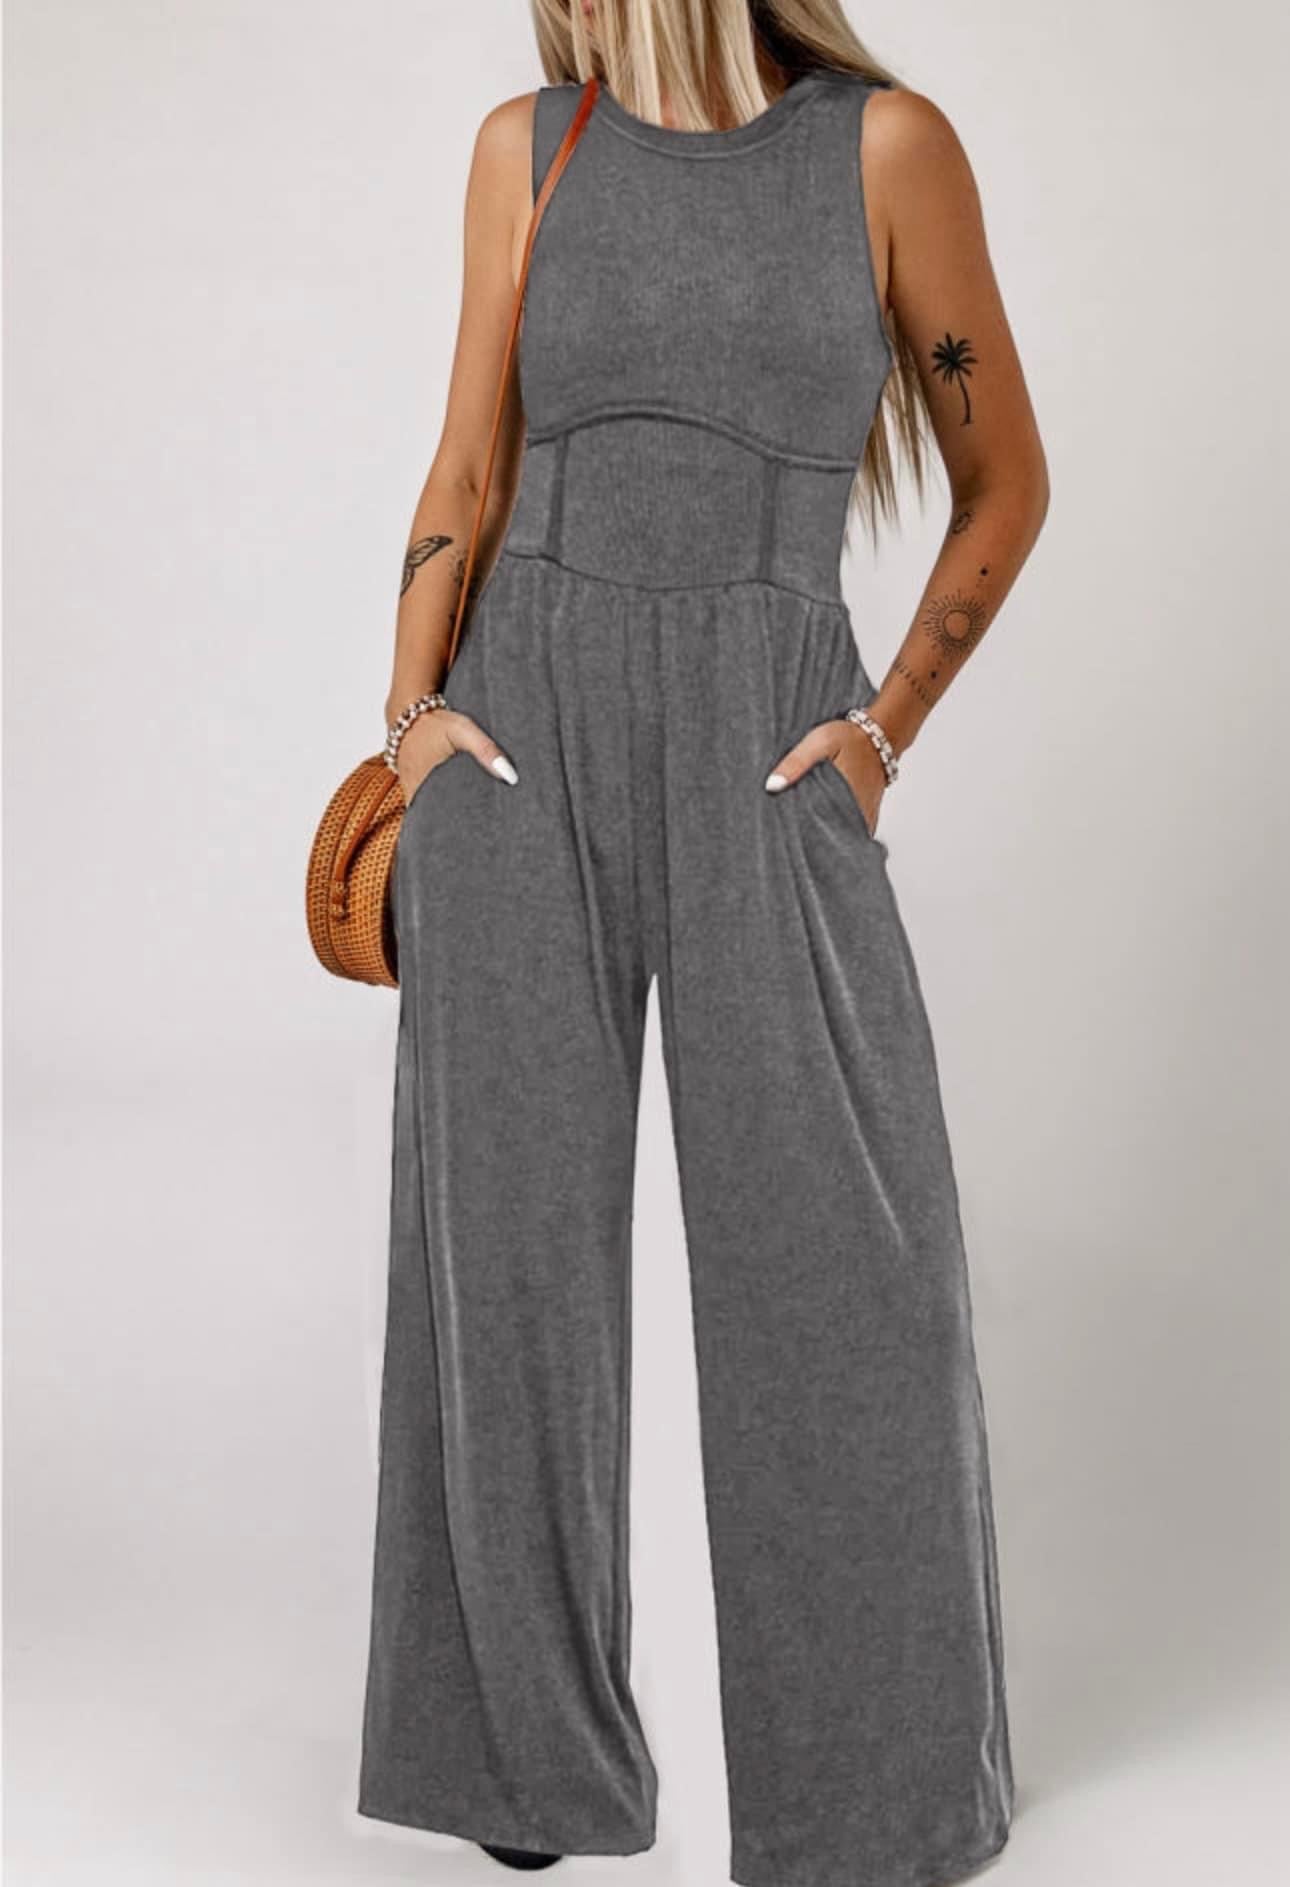 Cinched Waist Wide Leg Jumpsuit - CountryFide Custom Accessories and Outdoors